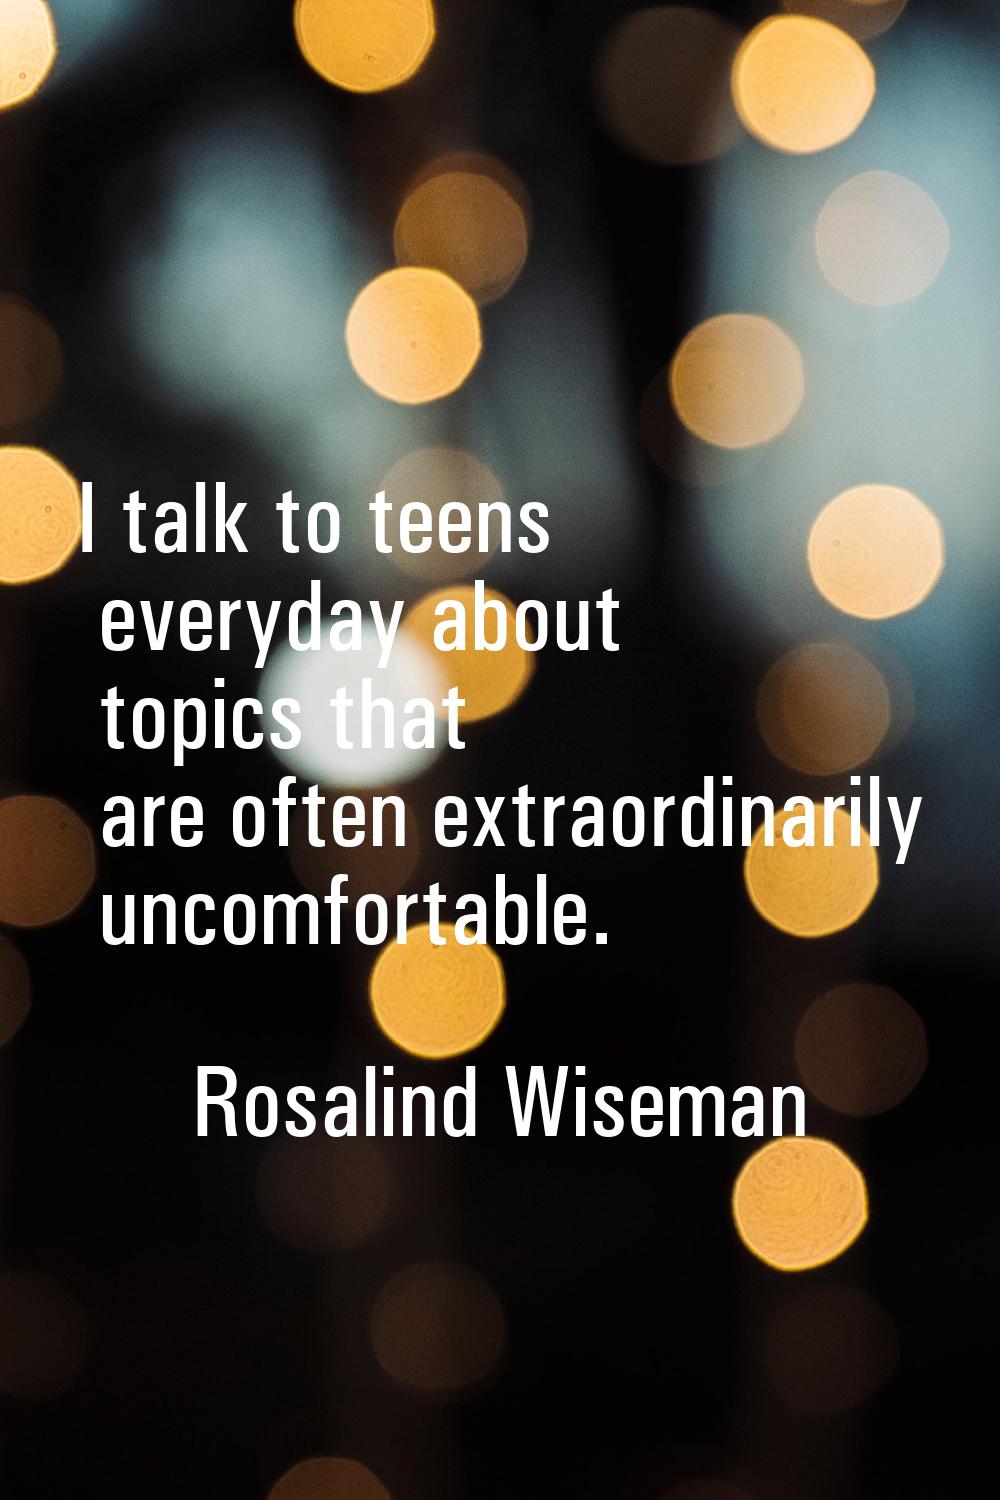 I talk to teens everyday about topics that are often extraordinarily uncomfortable.